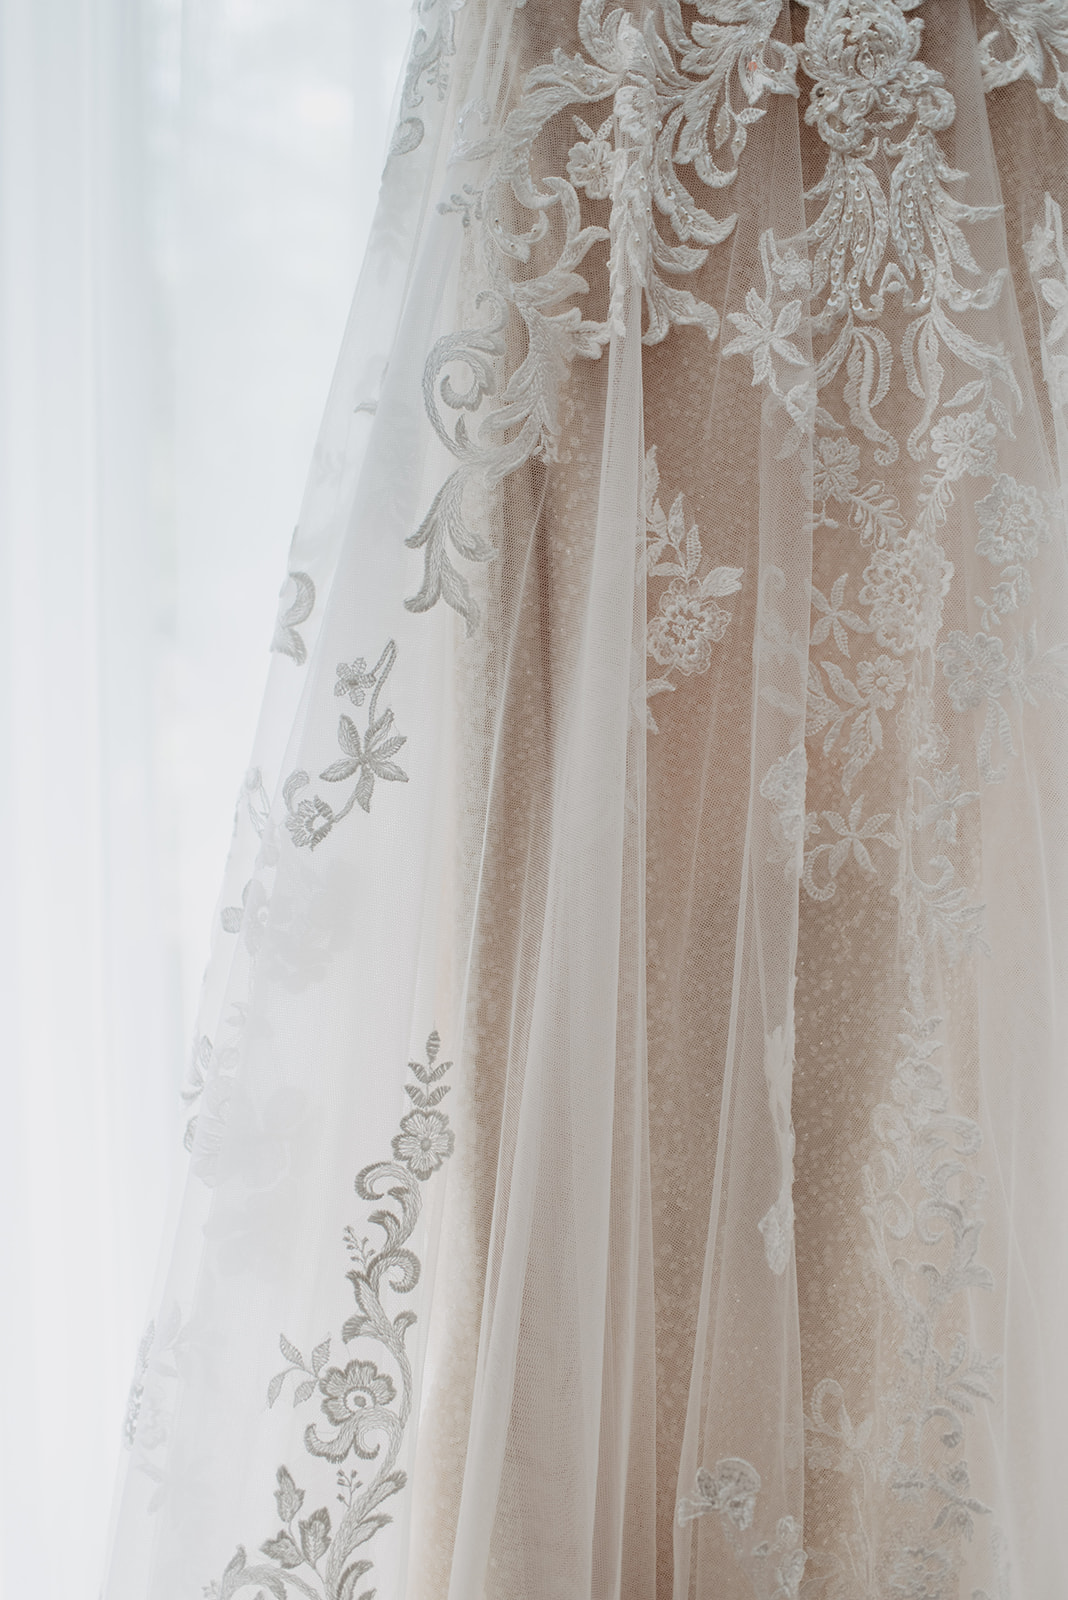 bridal gown with tulle and lace skirt sitting in a window for a detail shot